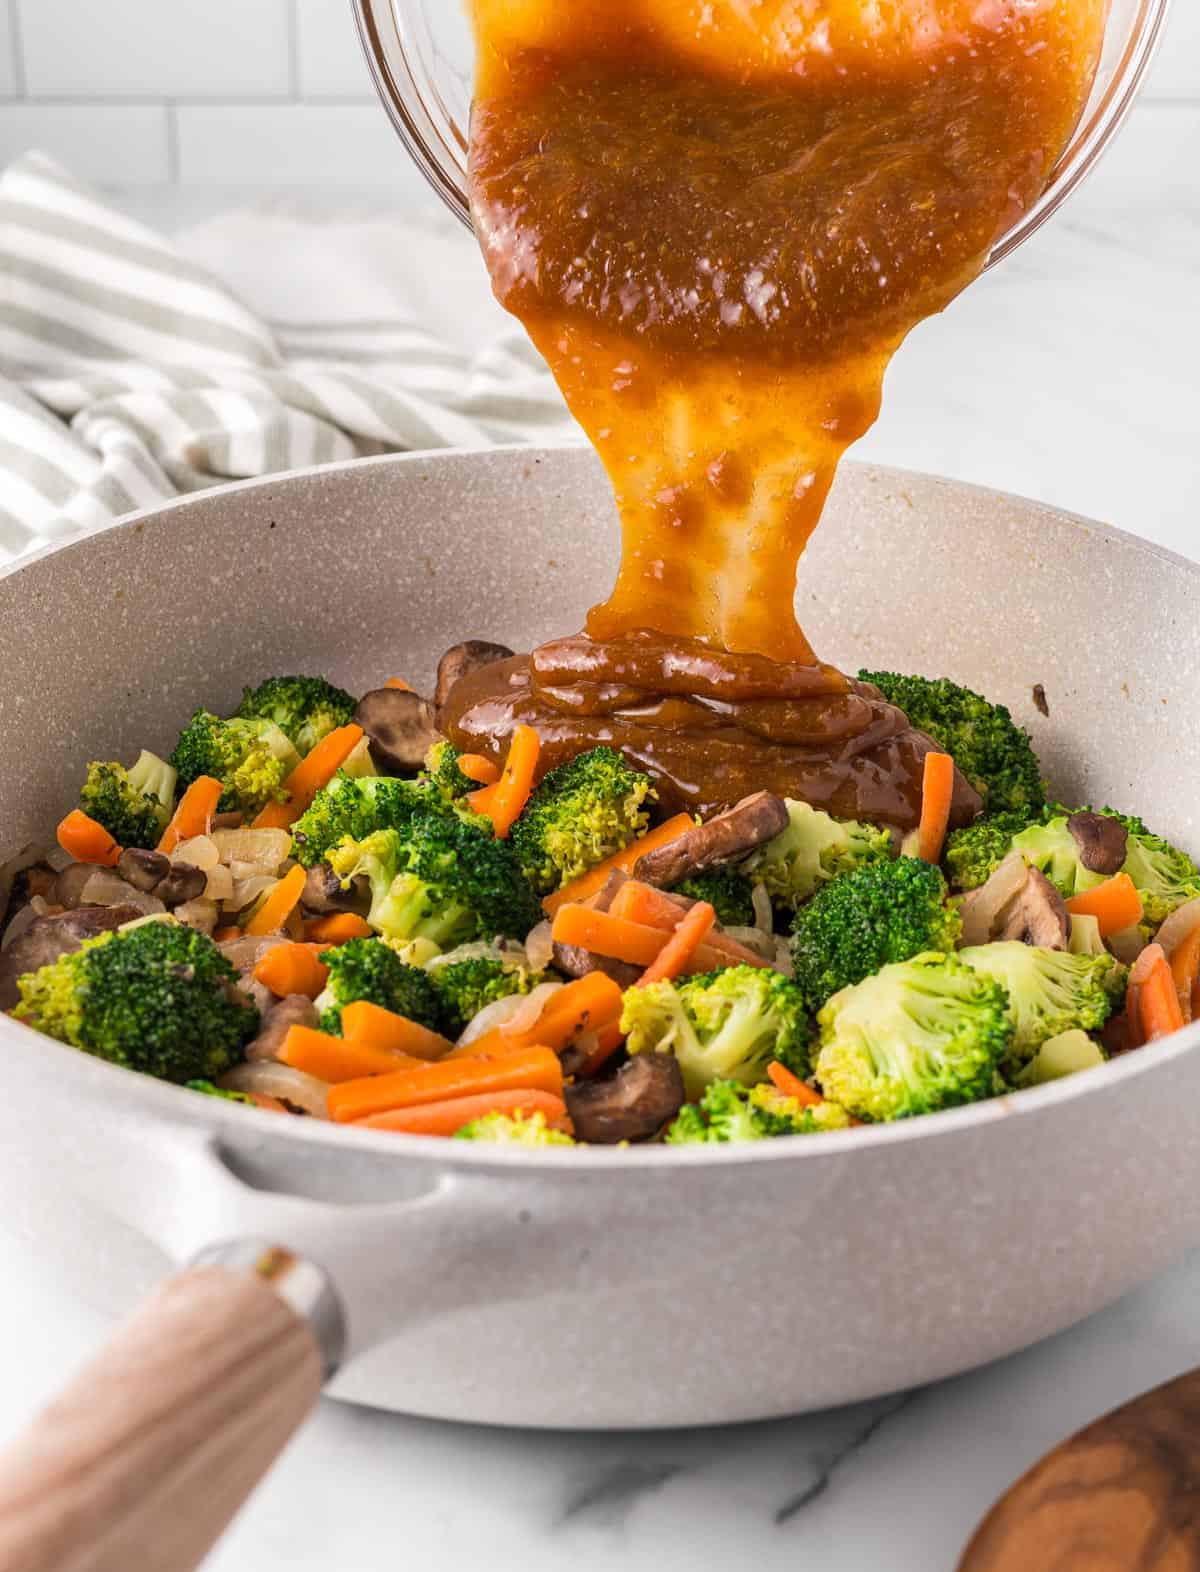 pouring the teriyaki sauce over the vegetables